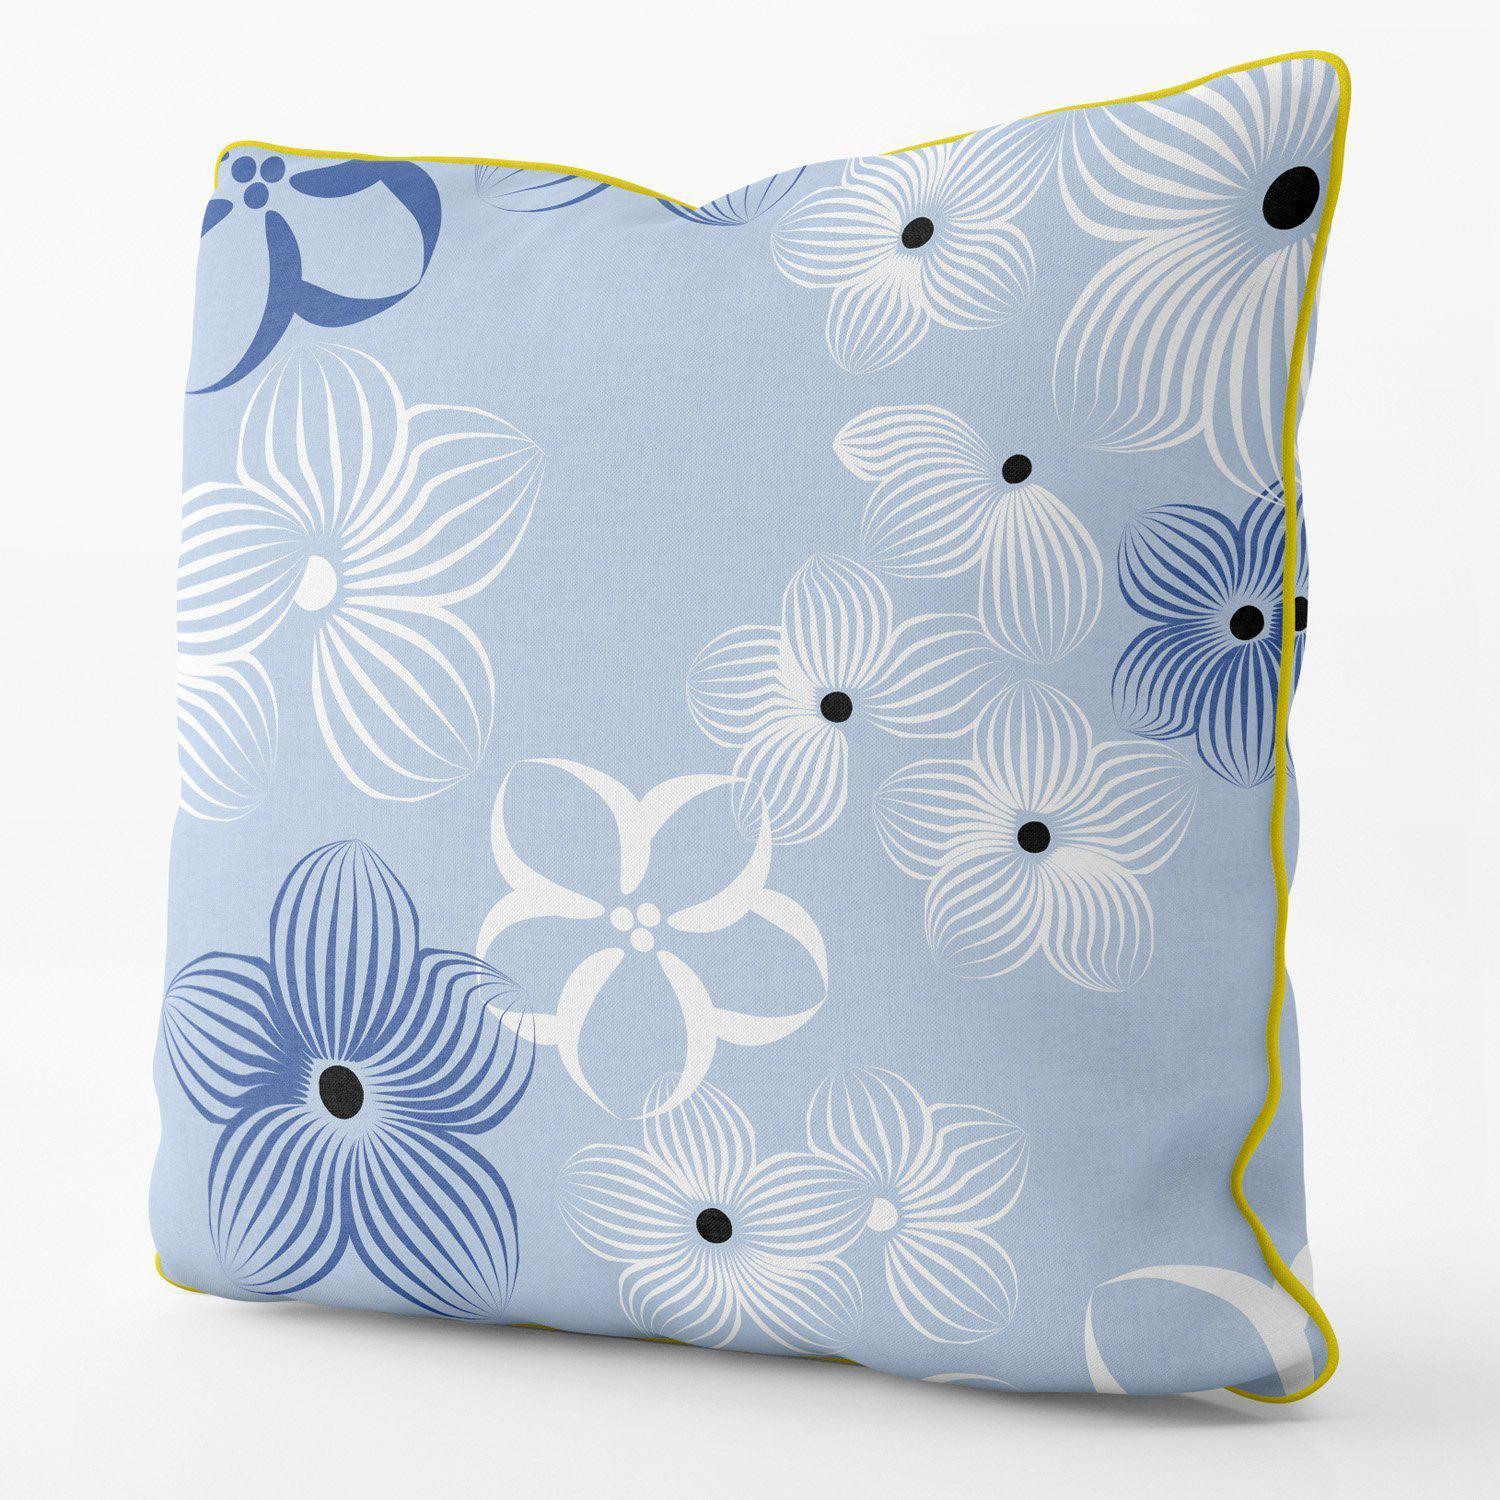 Flora Impression ( Blue) - Funky Art Cushion - Perfect Day - House Of Turnowsky Pillows - Handmade Cushions UK - WeLoveCushions